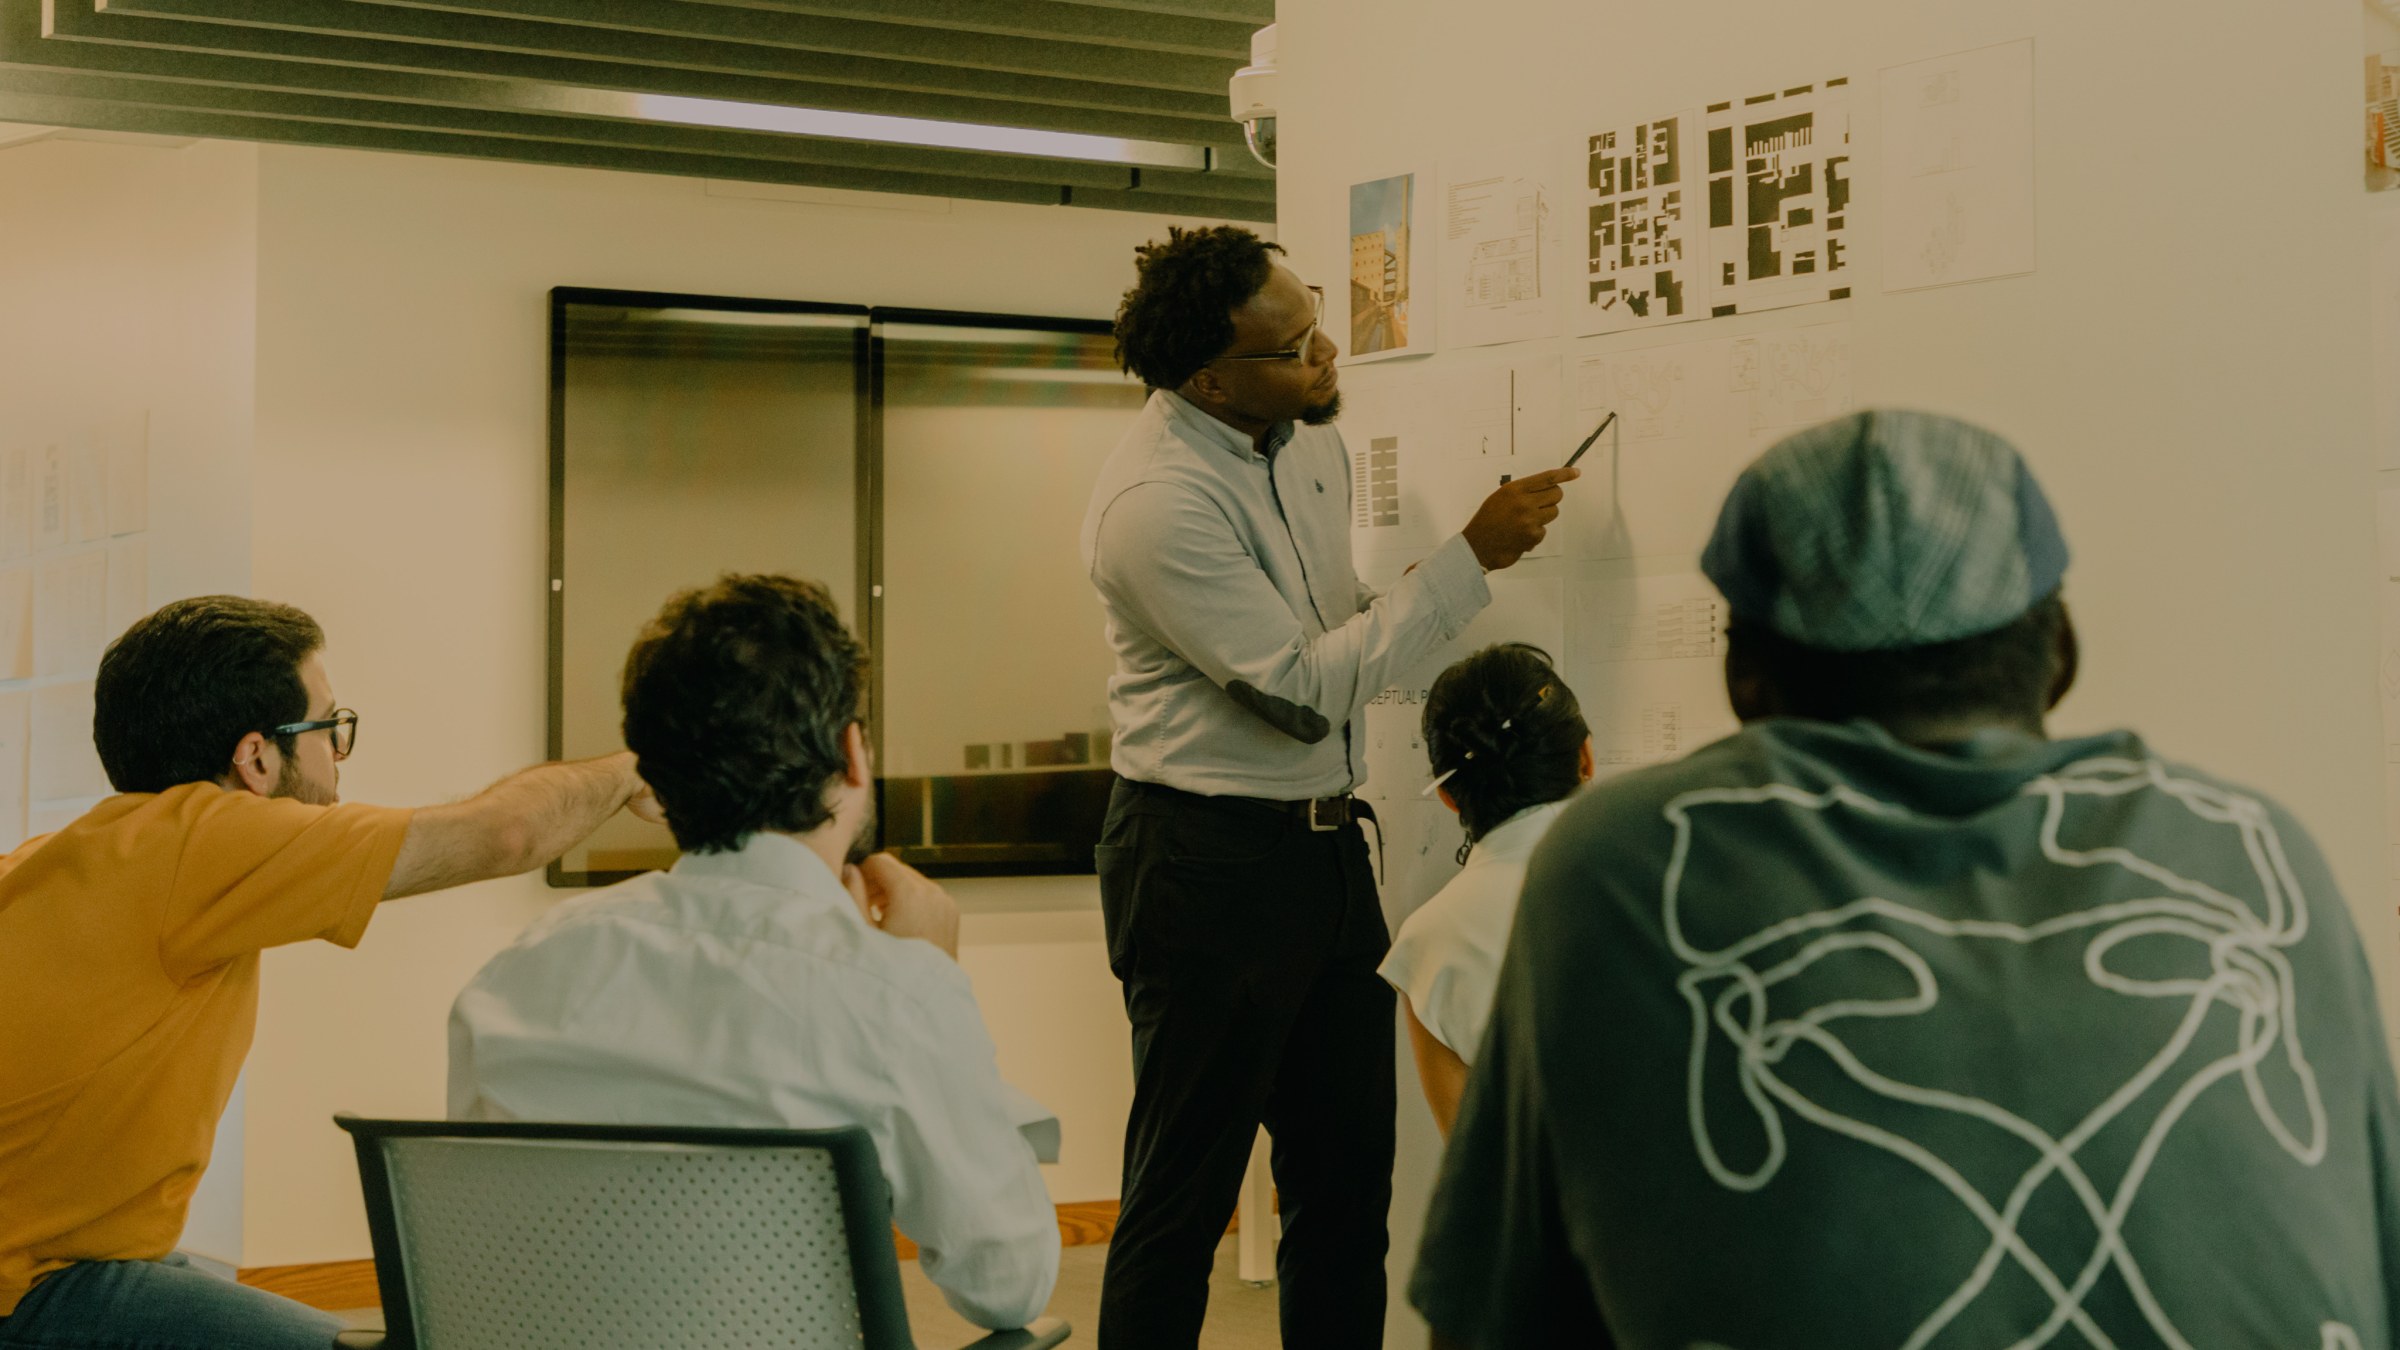 Student stands next to and points at pinned-up prints in the background while people sit in chairs, leaning forward, in the foreground with backs turned toward the camera's view.